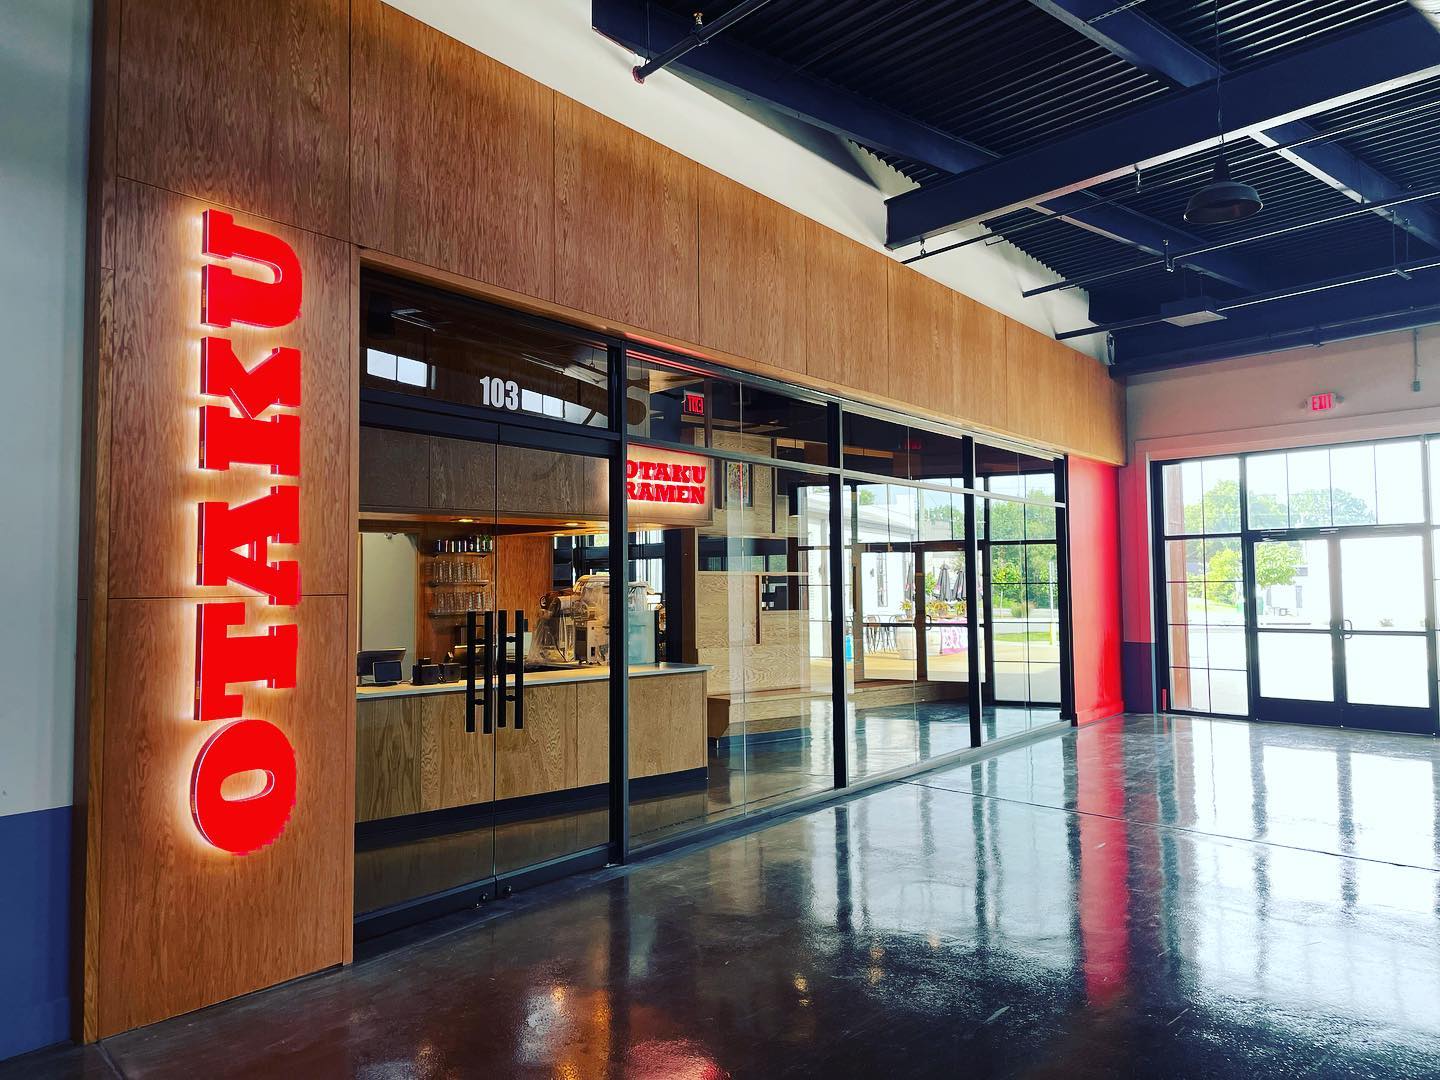 Indoor entrance to Otaku Ramen featuring a bright red sign that reads “Otaku” and polished glass doors and windows. 